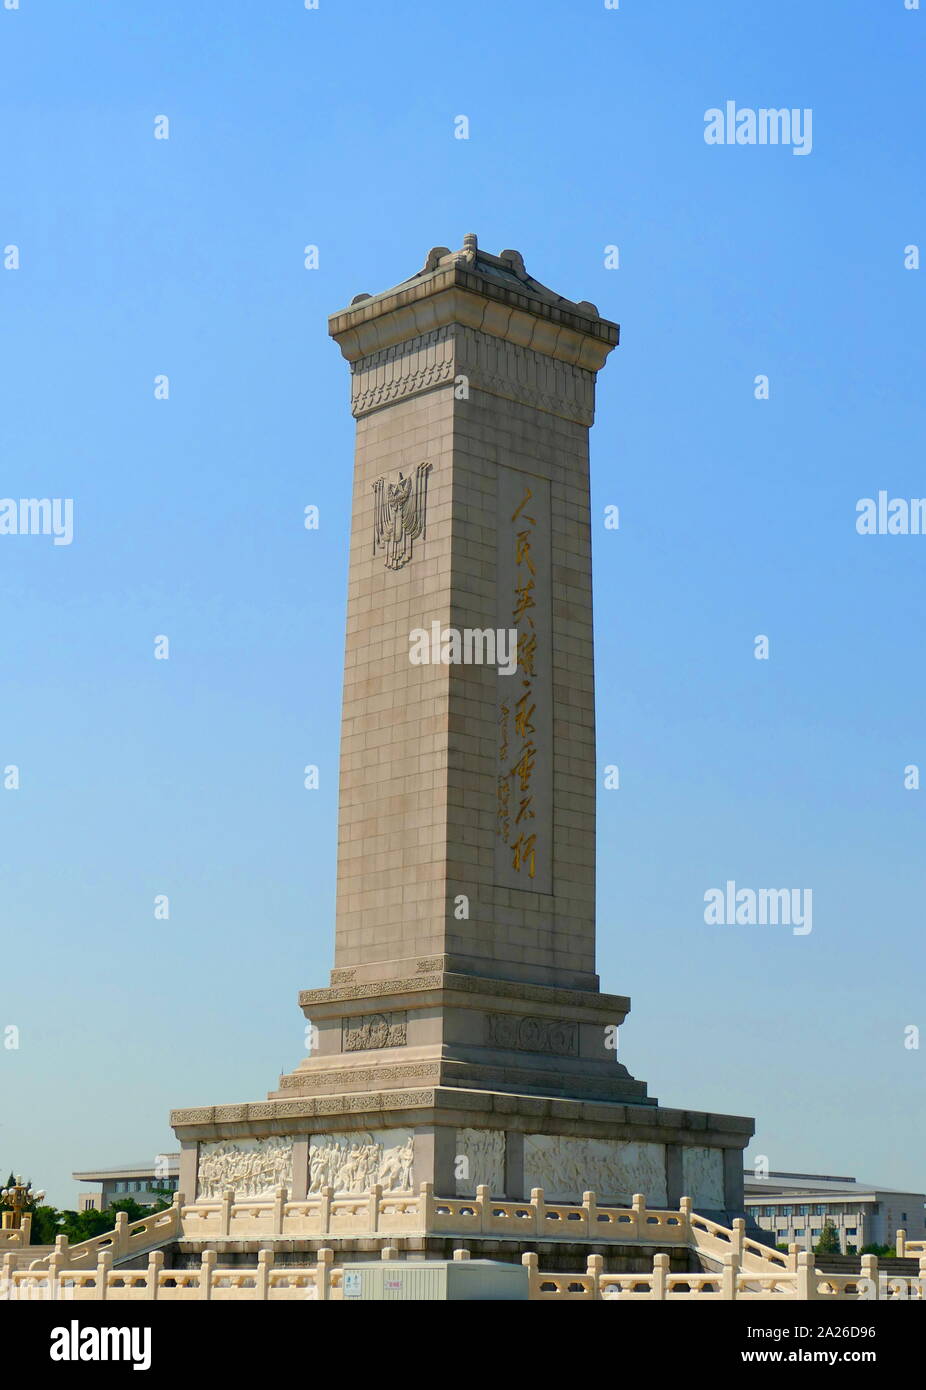 The Monument to the People's Heroes, erected as a national monument of China to the martyrs of revolutionary struggle during the 19th and 20th centuries. It is located in the southern part of Tiananmen Square in Beijing Stock Photo